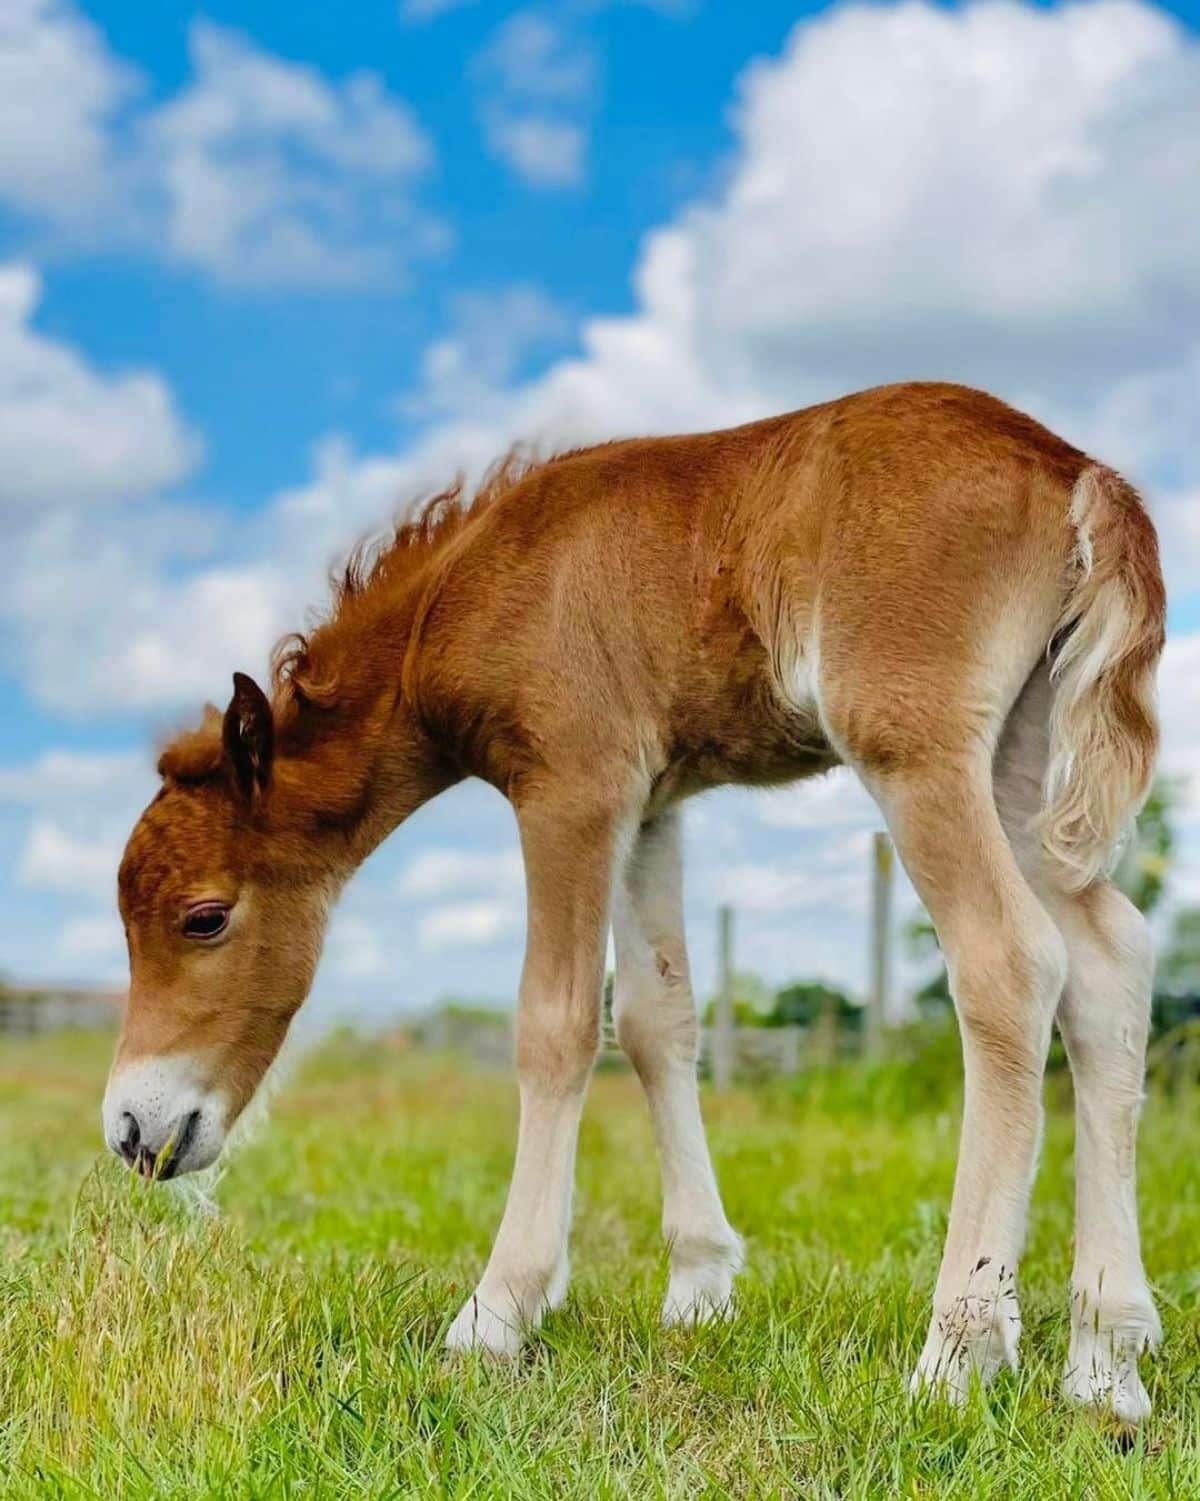 A light chestnut foal with a curly tail stands on a meadow.